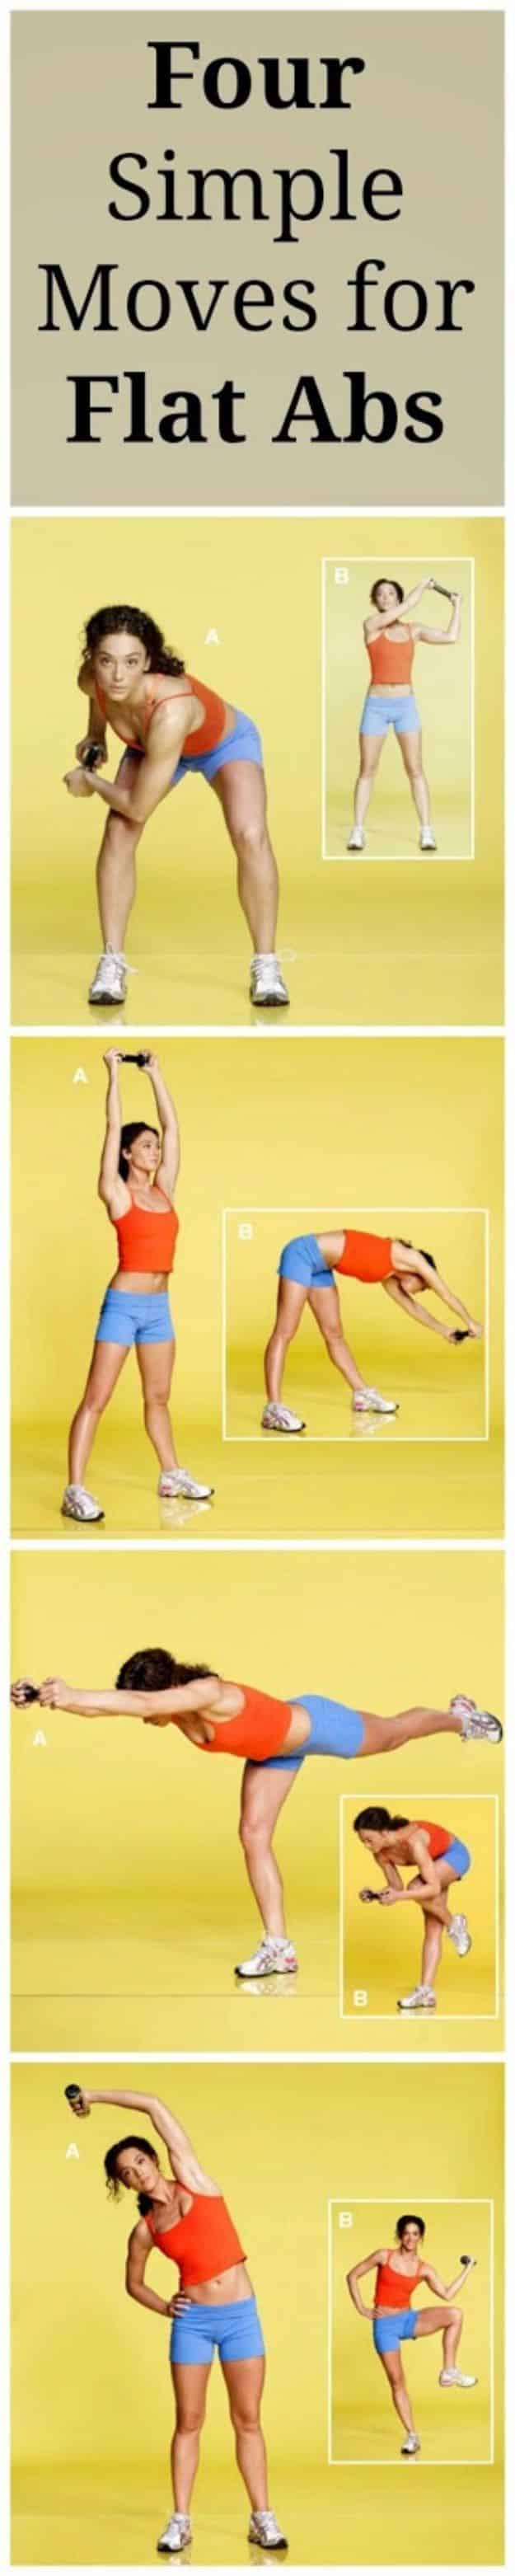 Best Exercises for 2018 - Four Simple Moves For Flat Abs - Easy At Home Exercises - Quick Exercise Tutorials to Try at Lunch Break - Ways To Get In Shape - Butt, Abs, Arms, Legs, Thighs, Tummy http://diyjoy.com/best-at-home-exercises-2018